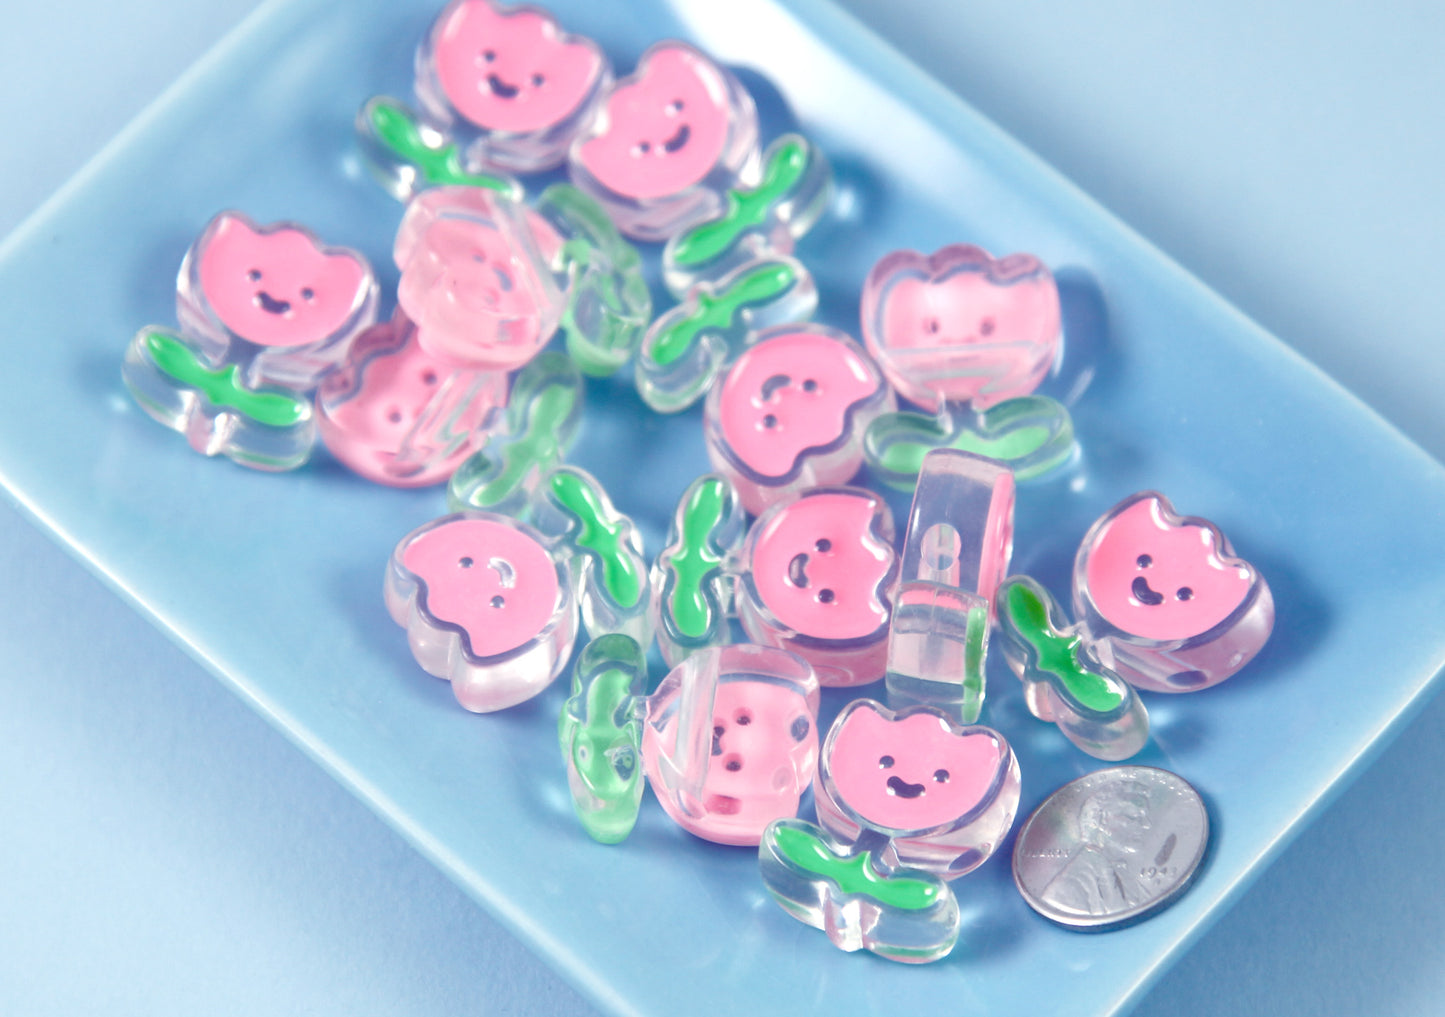 Flower Beads - 25mm Cute Happy Tulip Enamel Style Acrylic Beads or Resin Beads - 10 pc set